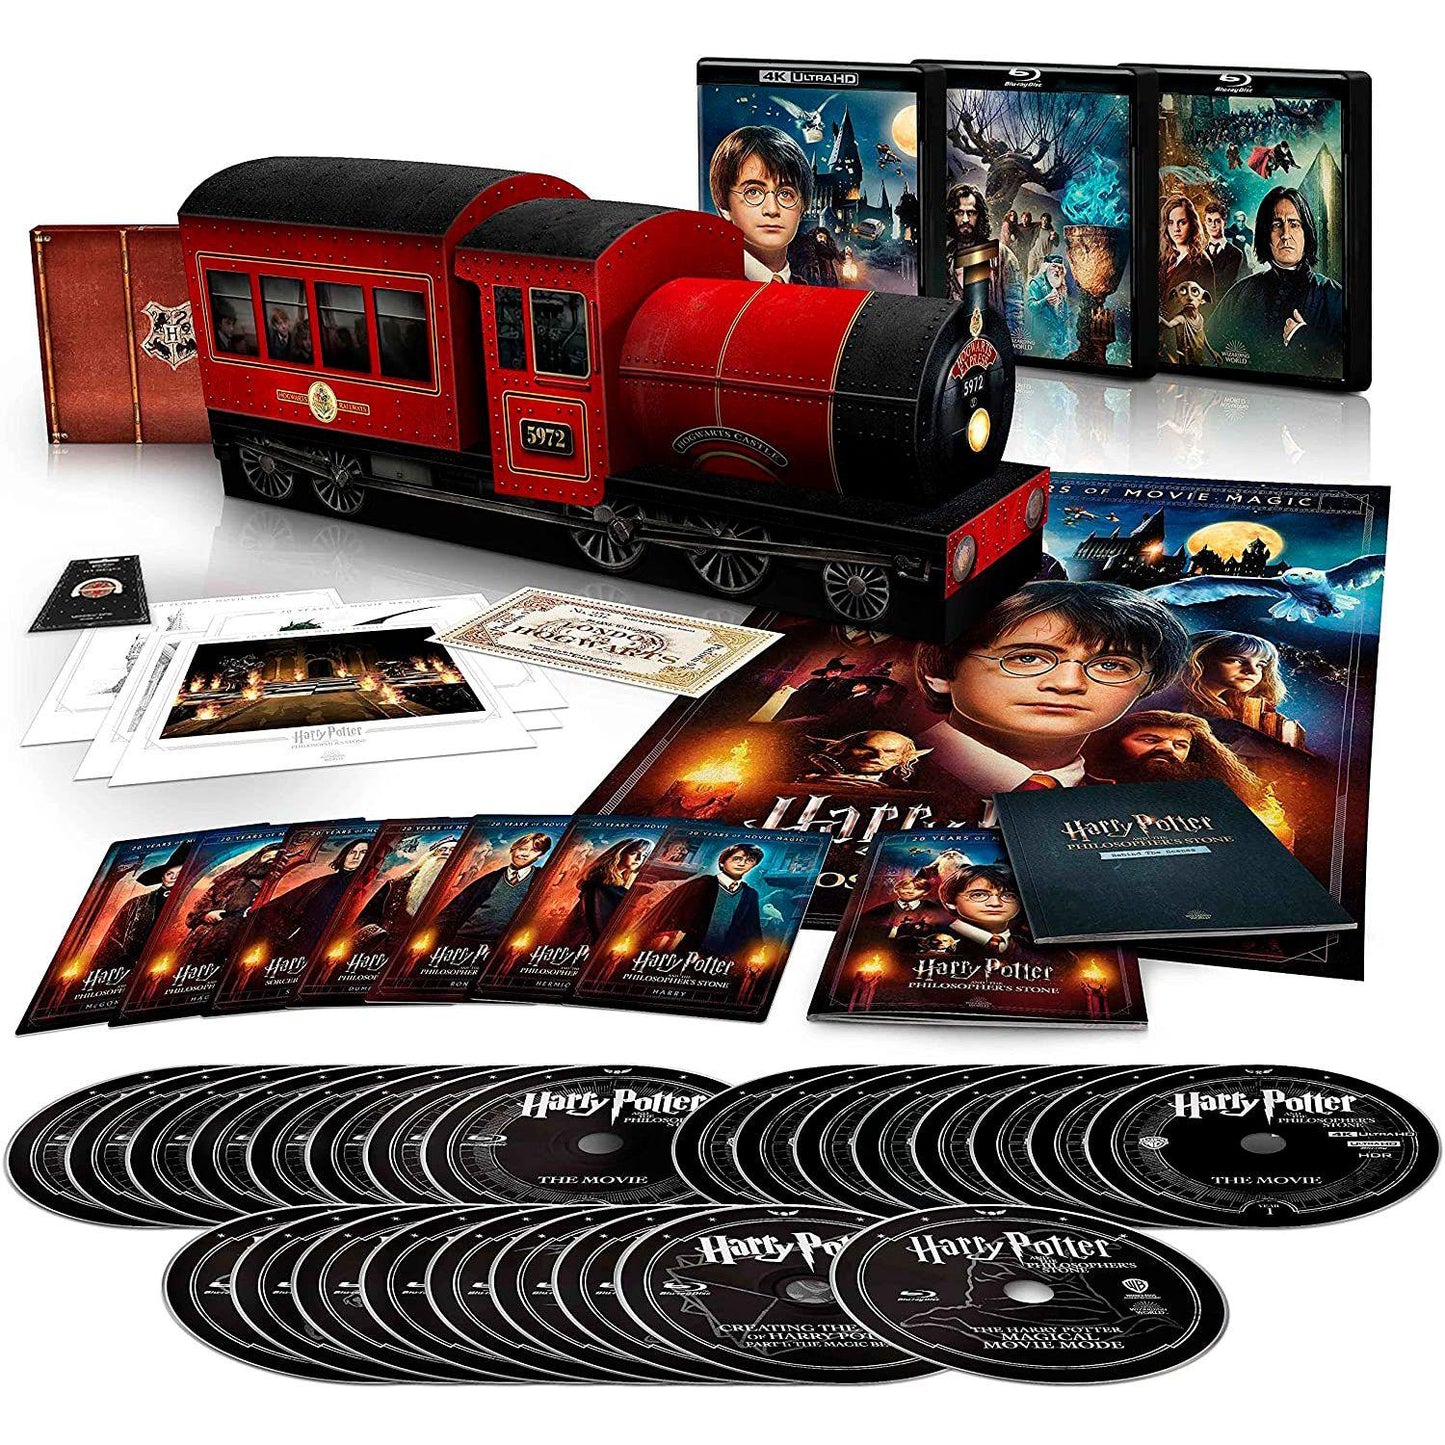  Harry Potter 20th Anniversary 8-Film Collection (4K + Blu-ray)  : Various, Various: Movies & TV